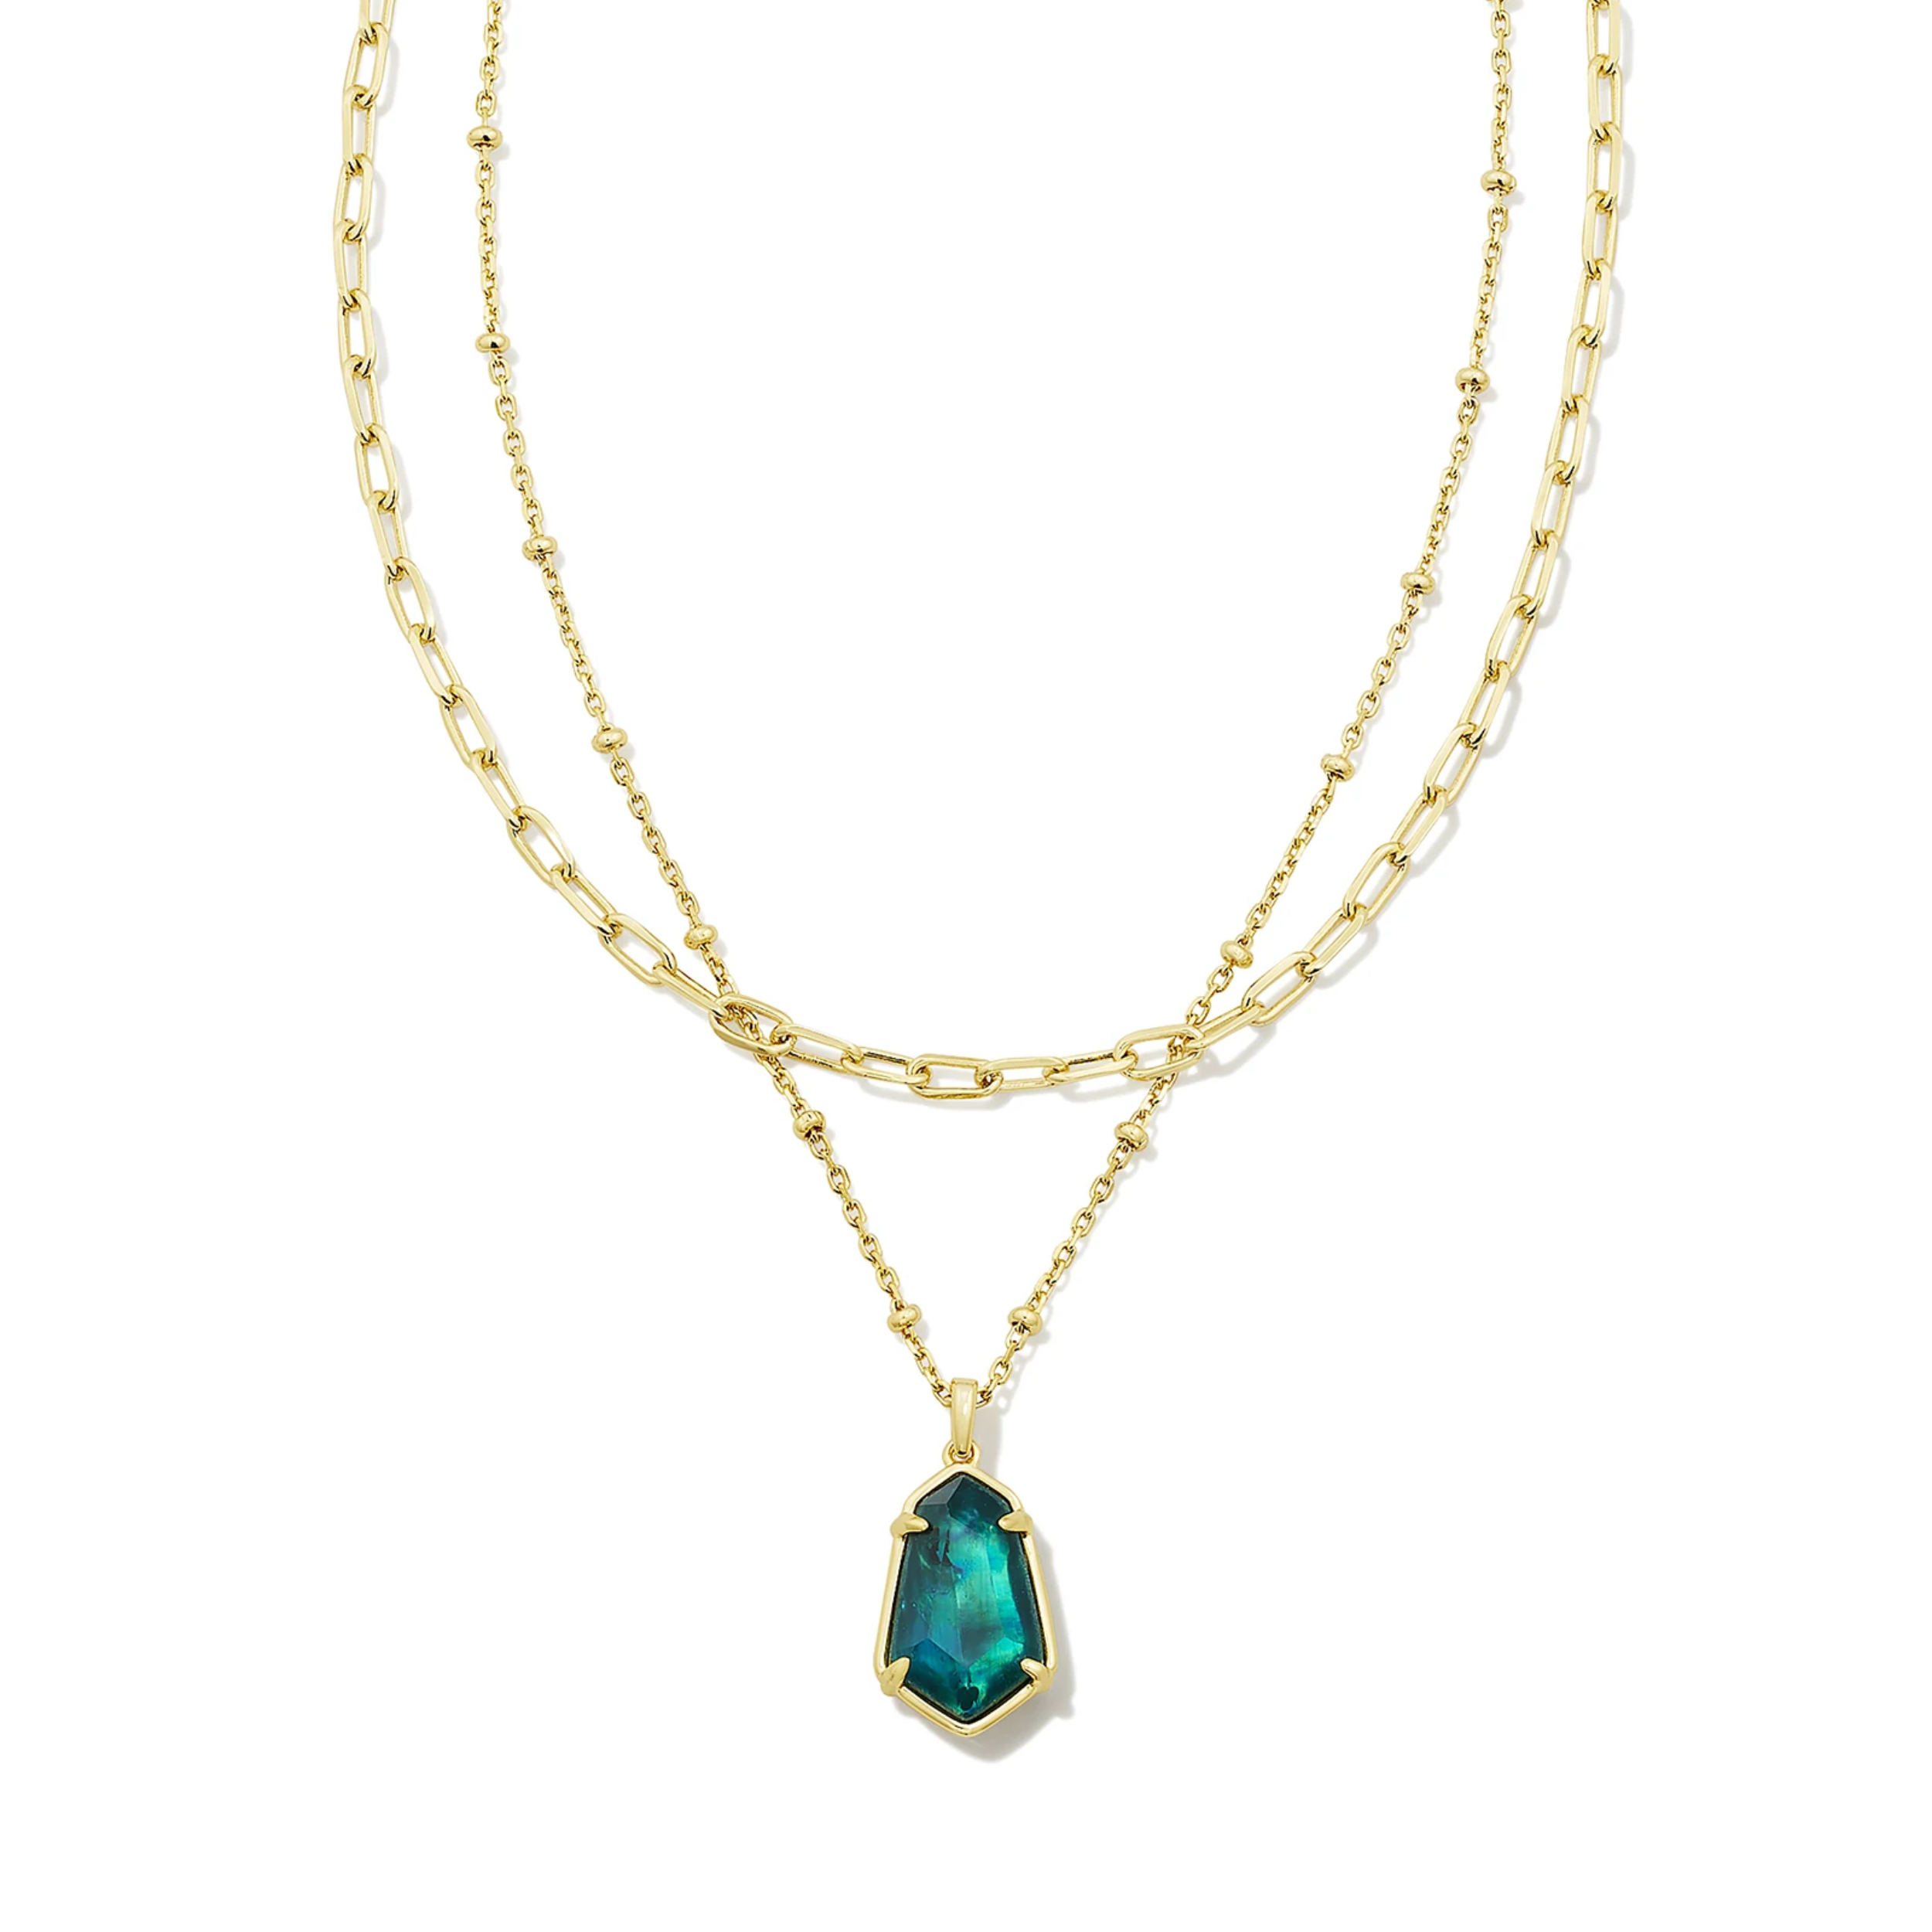 This Alexandria Gold Multi Strand Necklace in Teal Green Illusion by Kendra Scott is pictured on a white background.